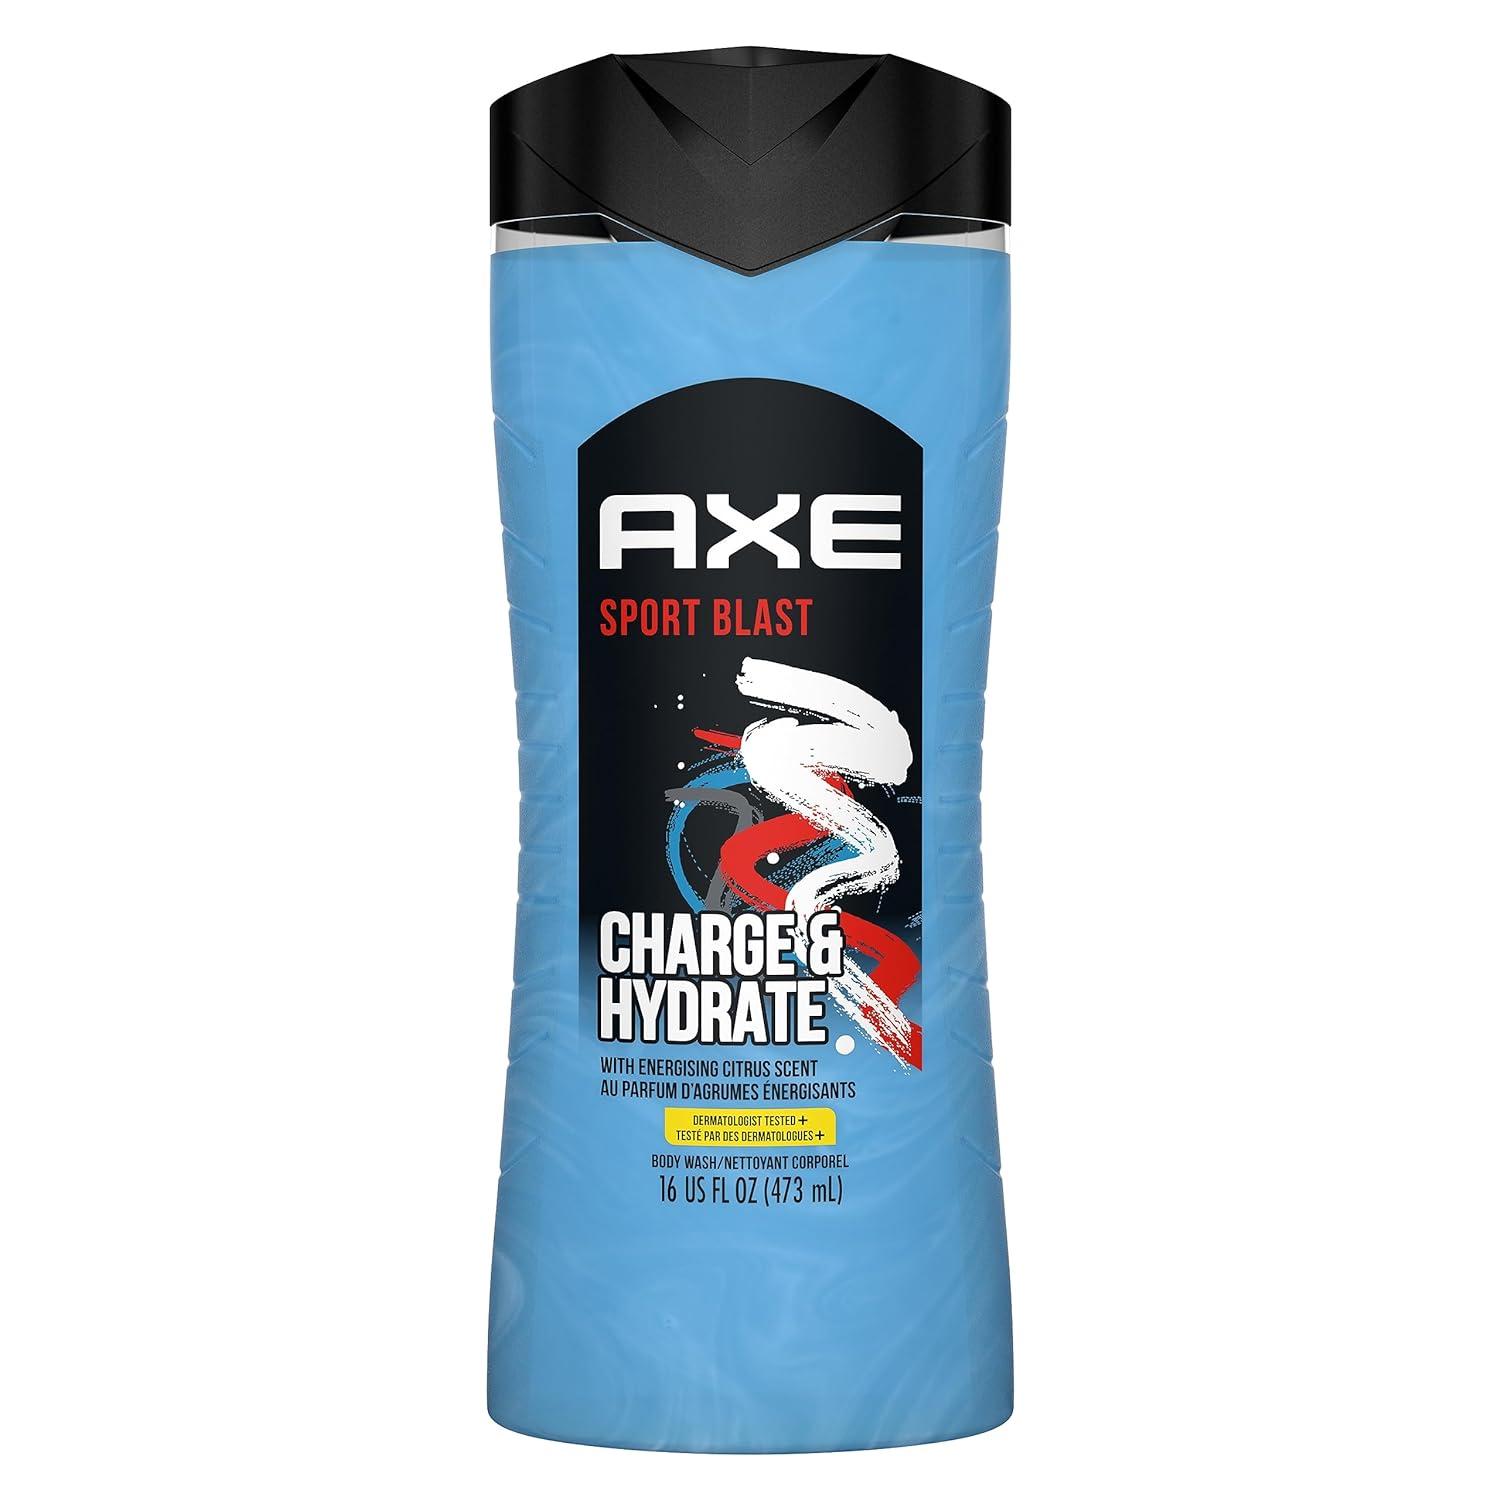 AXE Sport Blast Charge and Hydrate Body Wash for $1.74